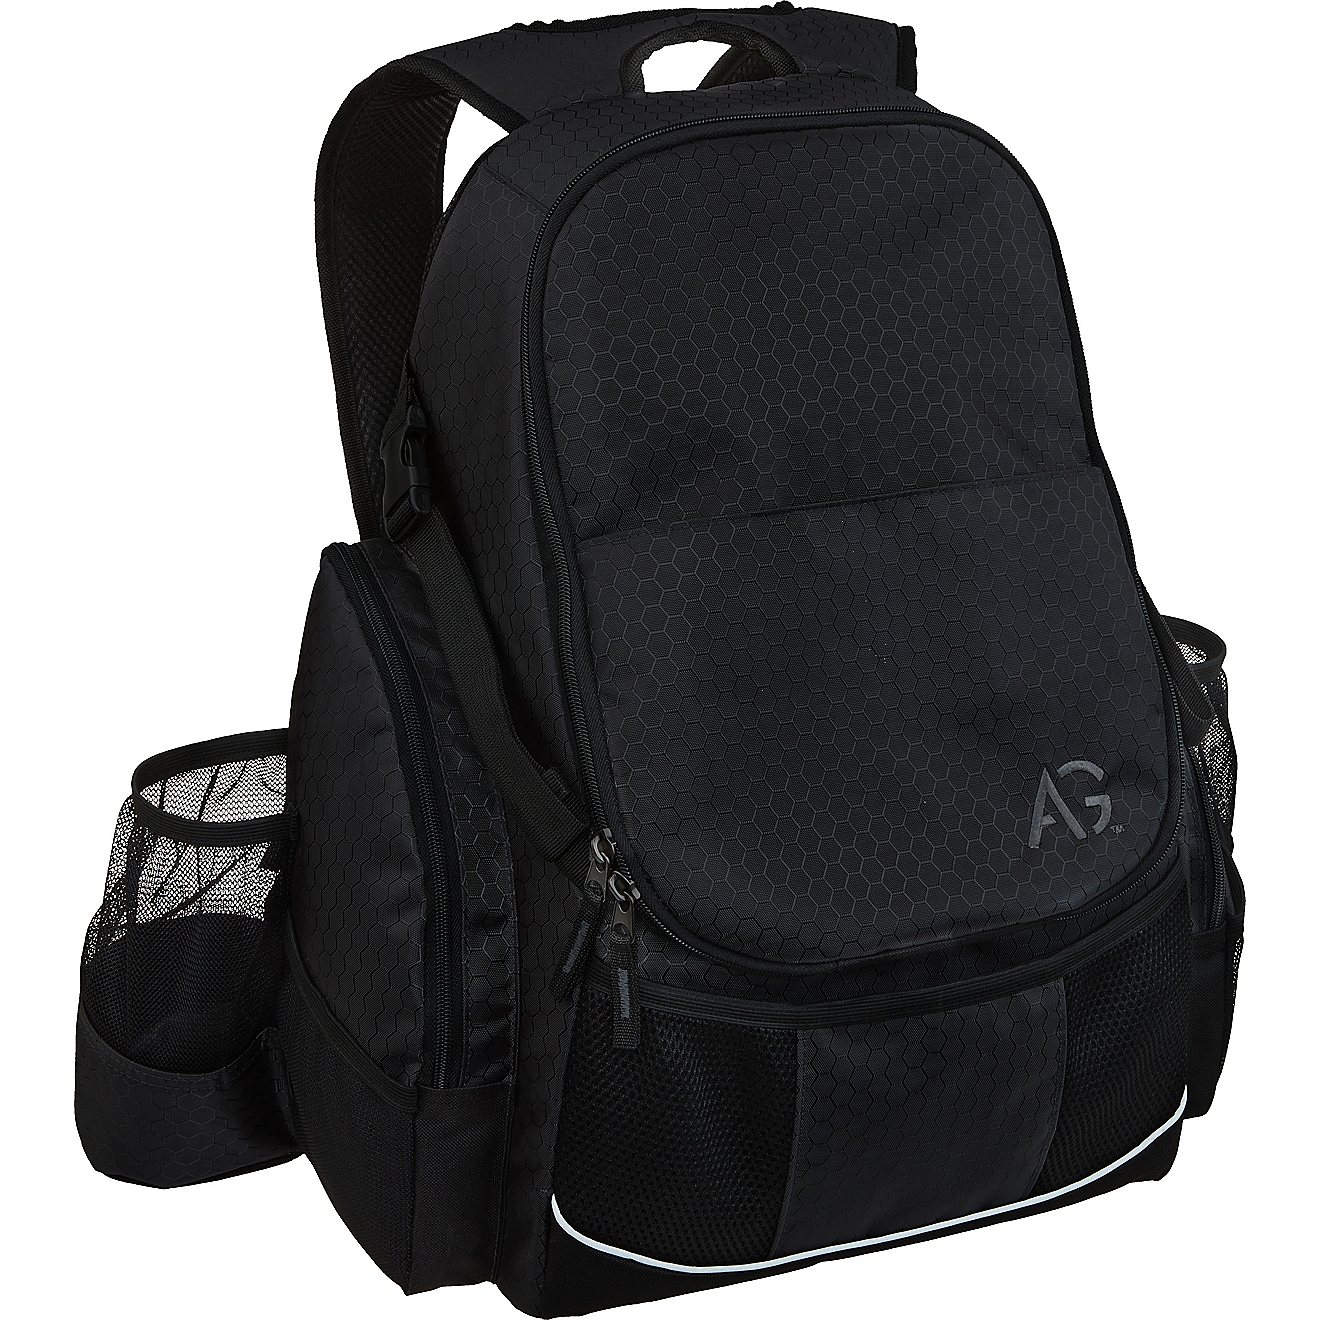 AGame Disc Golf Backpack                                                                                                         - view number 1